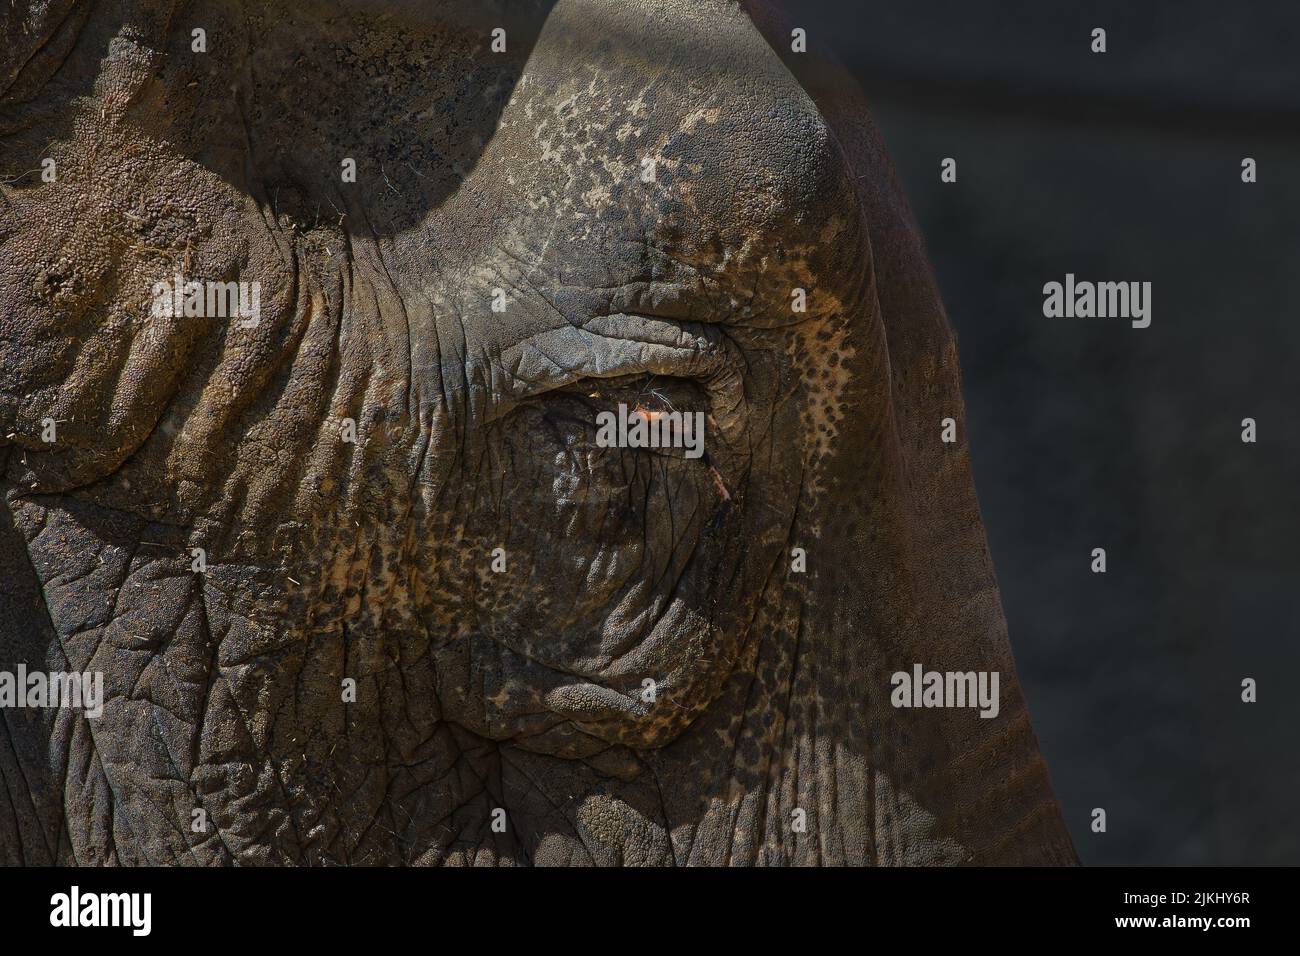 A profile of a large elephant with an orange colored eye Stock Photo